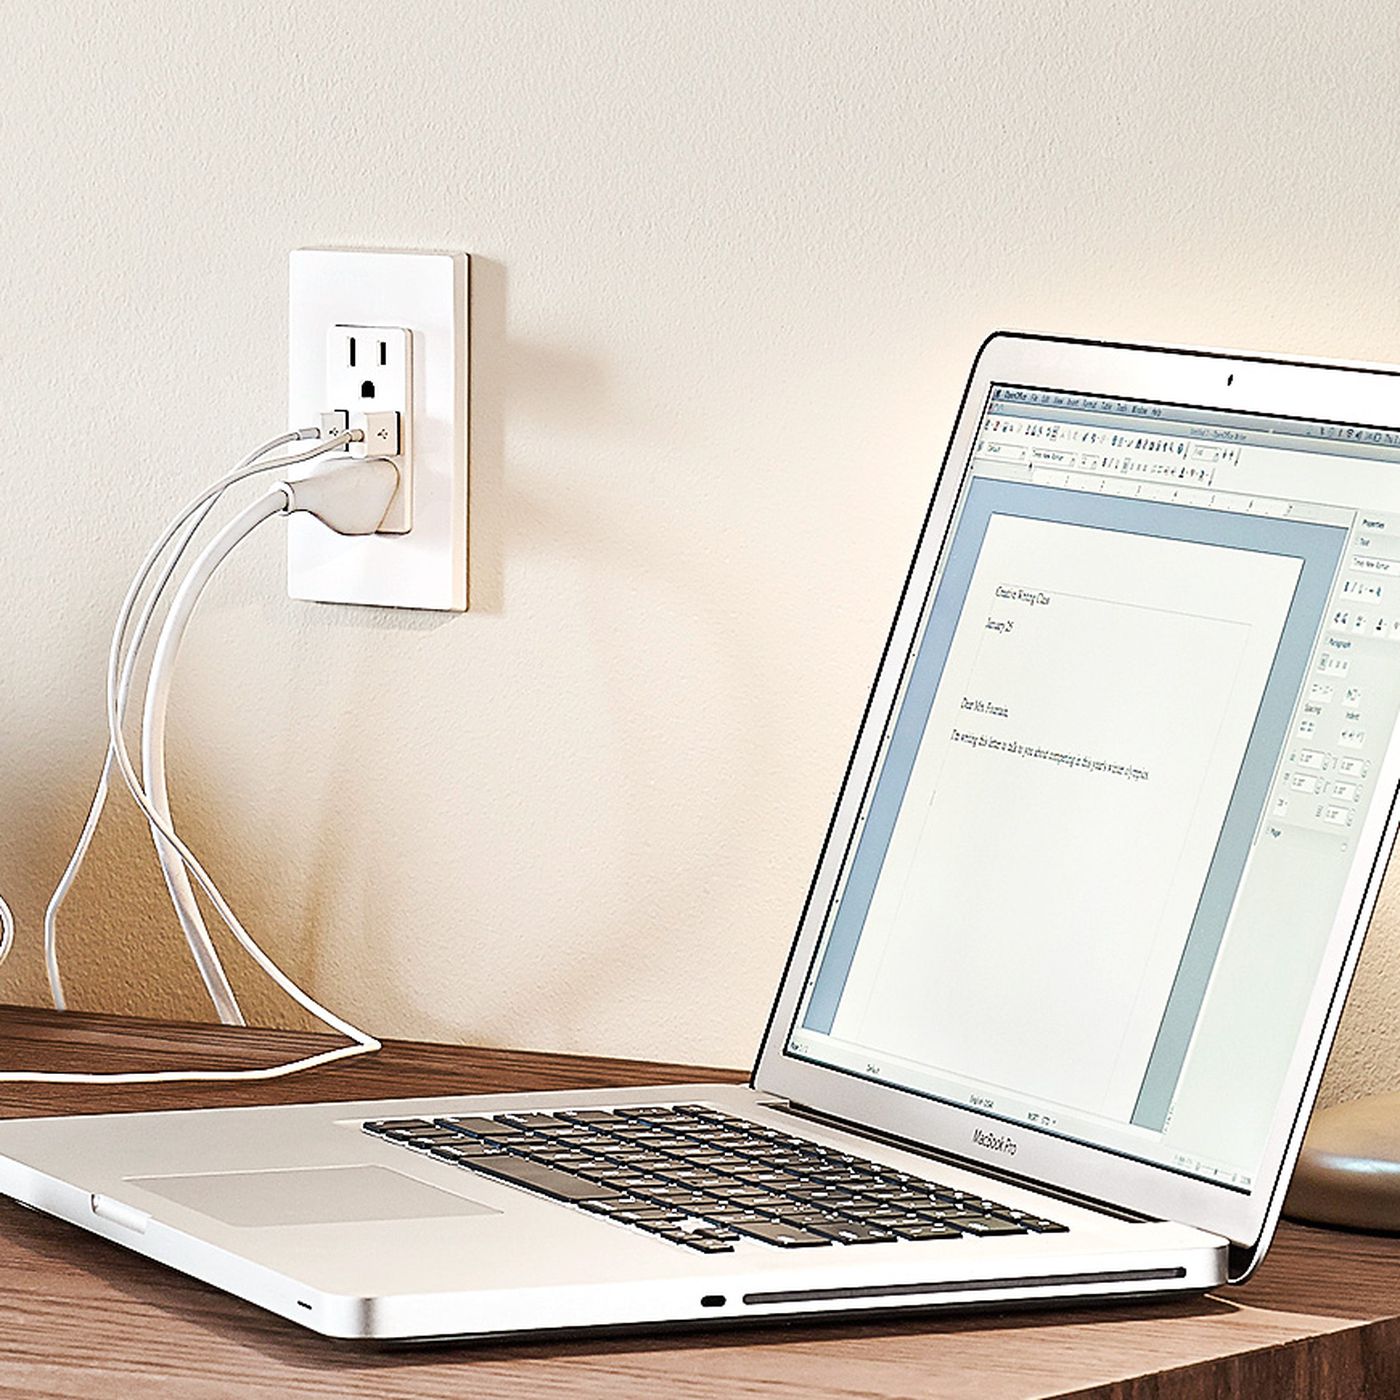 How to Install a USB Socket